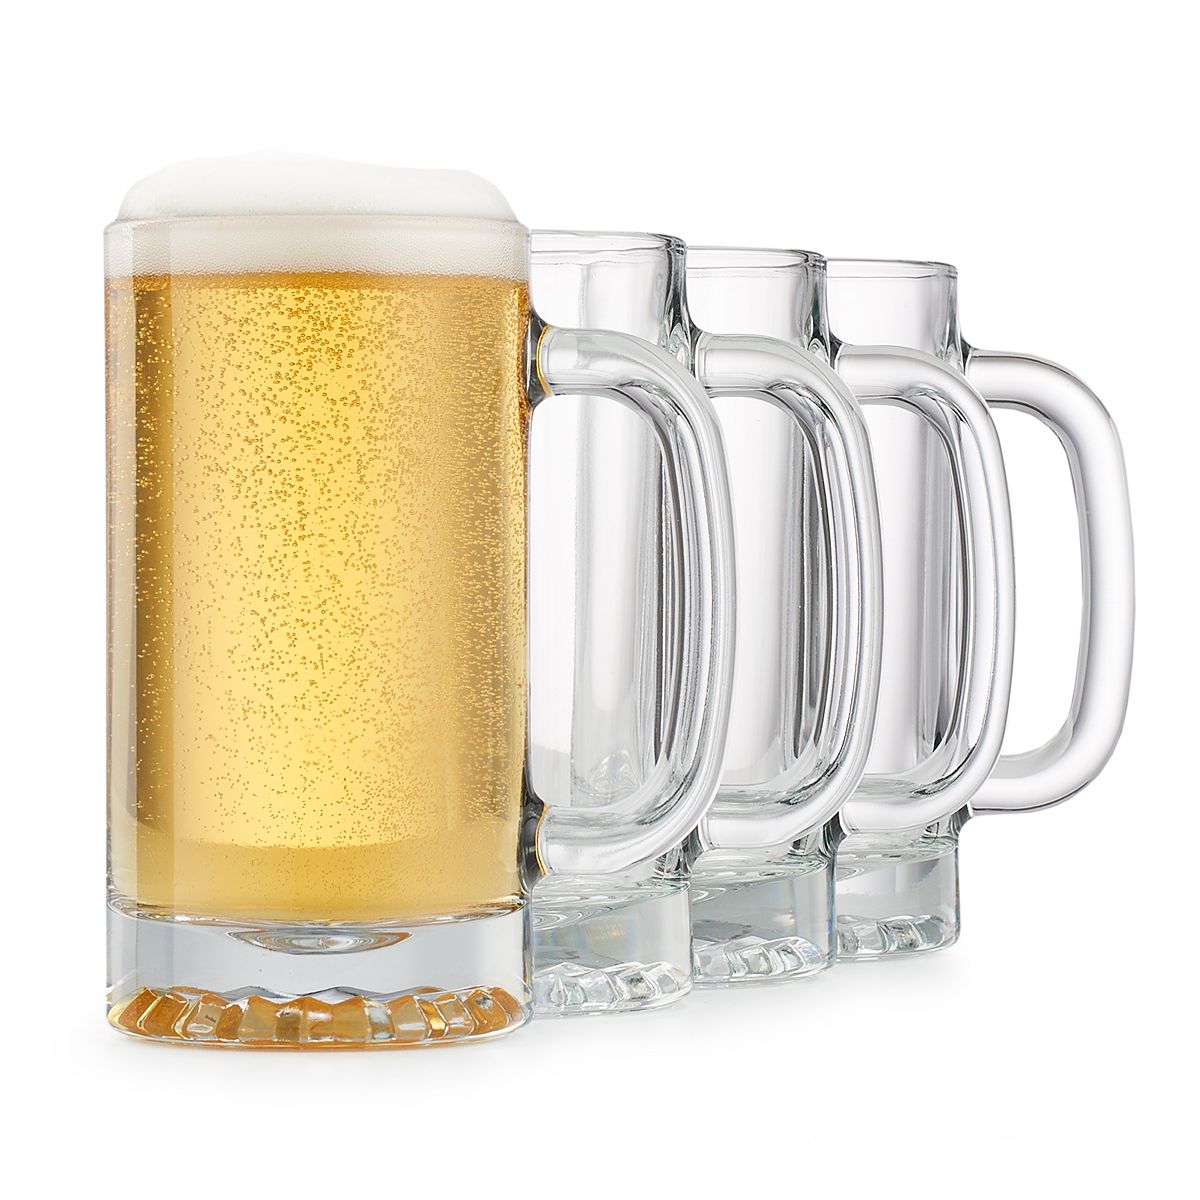 More than Pint Glasses and Mugs: A Beer Glassware Guide - Columbia